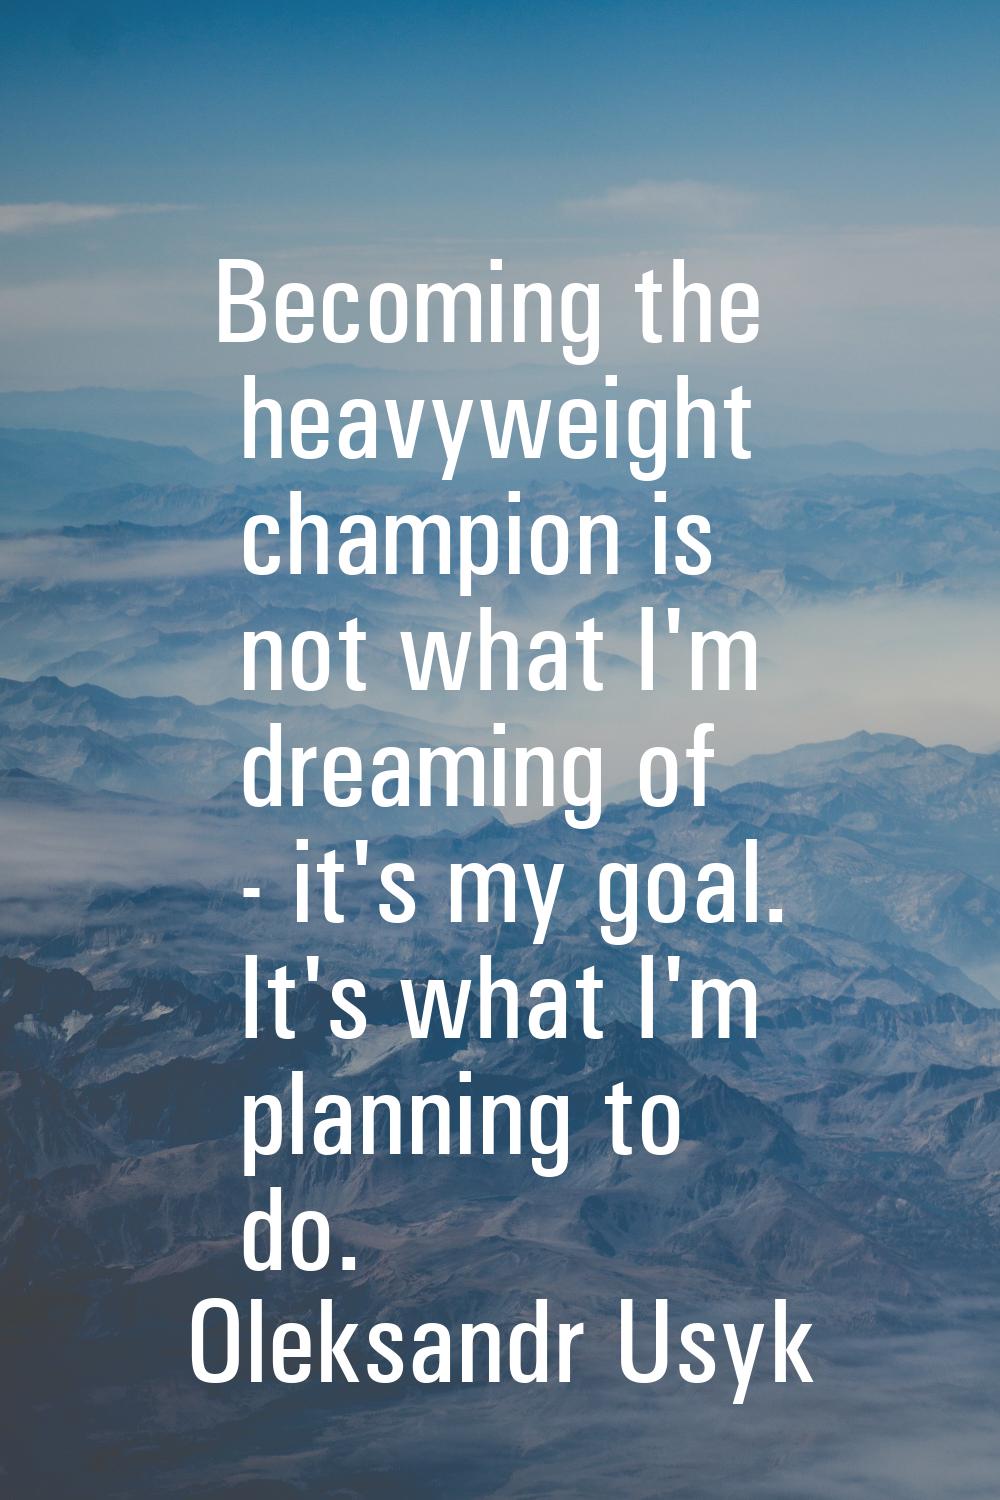 Becoming the heavyweight champion is not what I'm dreaming of - it's my goal. It's what I'm plannin